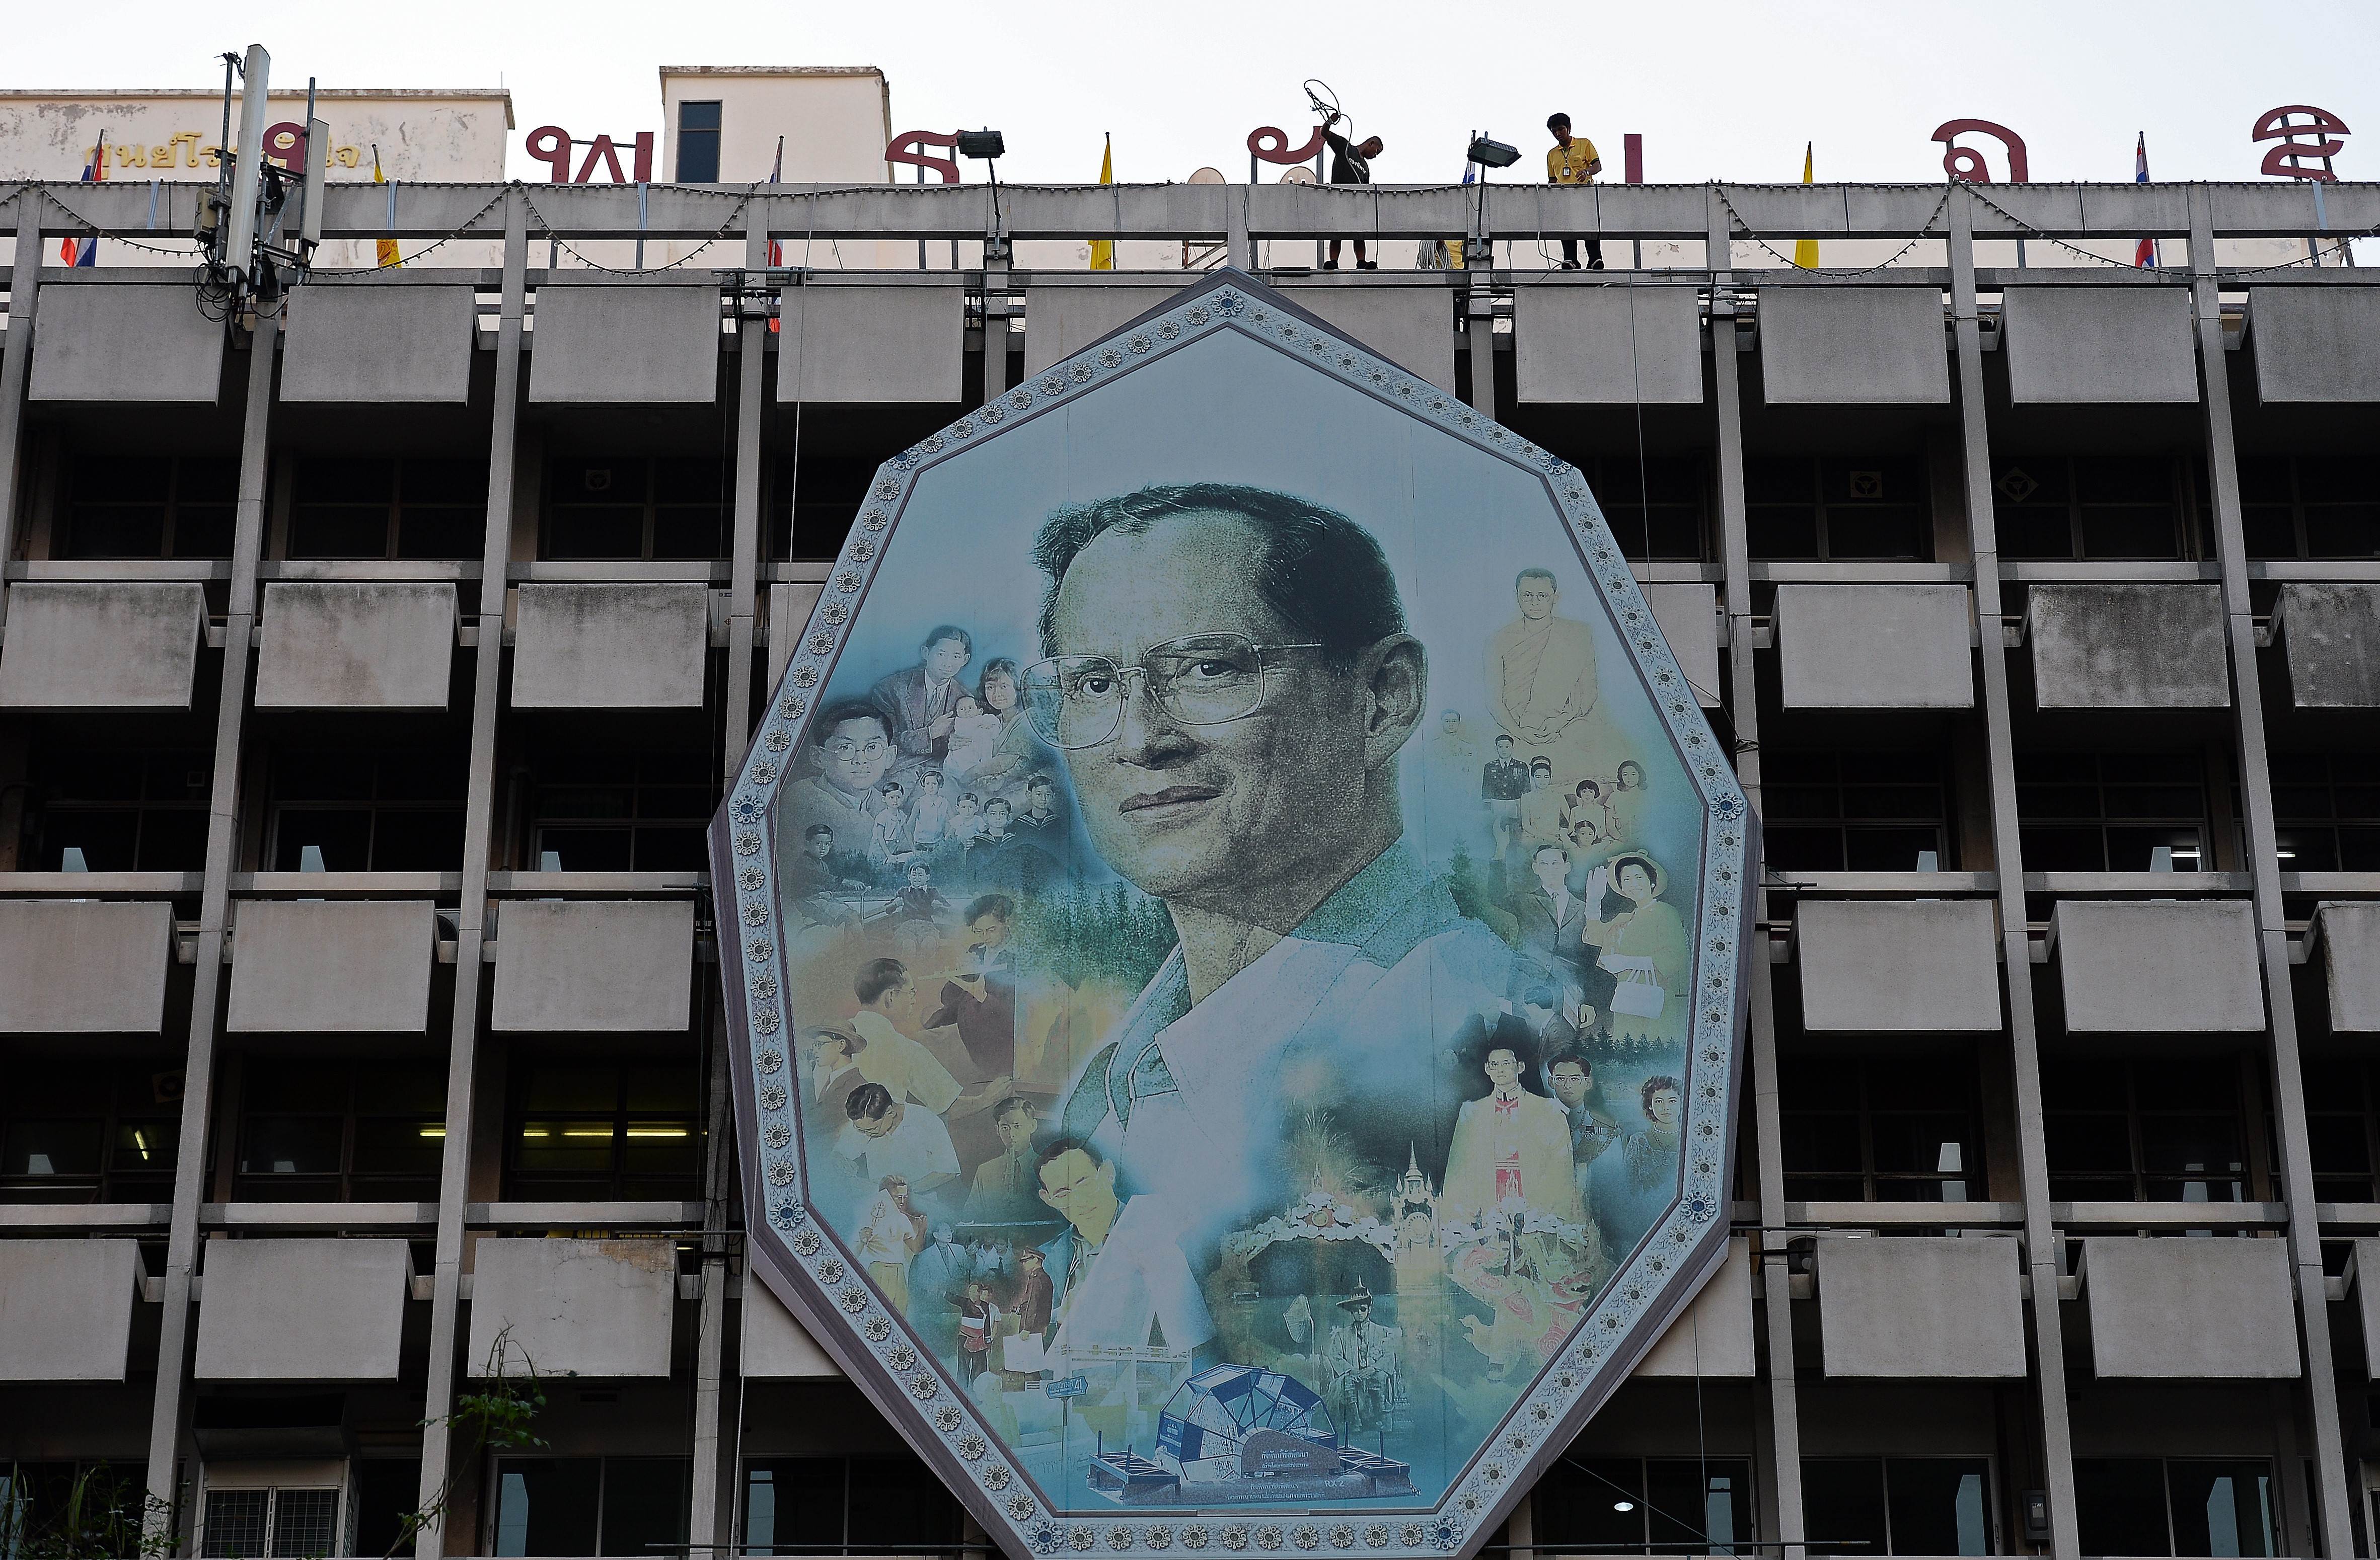 Workers use ropes to remove a portrait of King Bhumibol Adulyadej and install a new one on a facade as people gather at the Siriraj hospital where the King has been staying for months on the eve of his 88th birthday in Bangkok on December 4, 2015. Thai King Bhumibol, the world's longest reigning monarch who is regarded as a demi-god by many Thais and considered a unifying force in a politically turbulent nation, will turn 88 on December 5, 2015. AFP PHOTO / Christophe ARCHAMBAULT